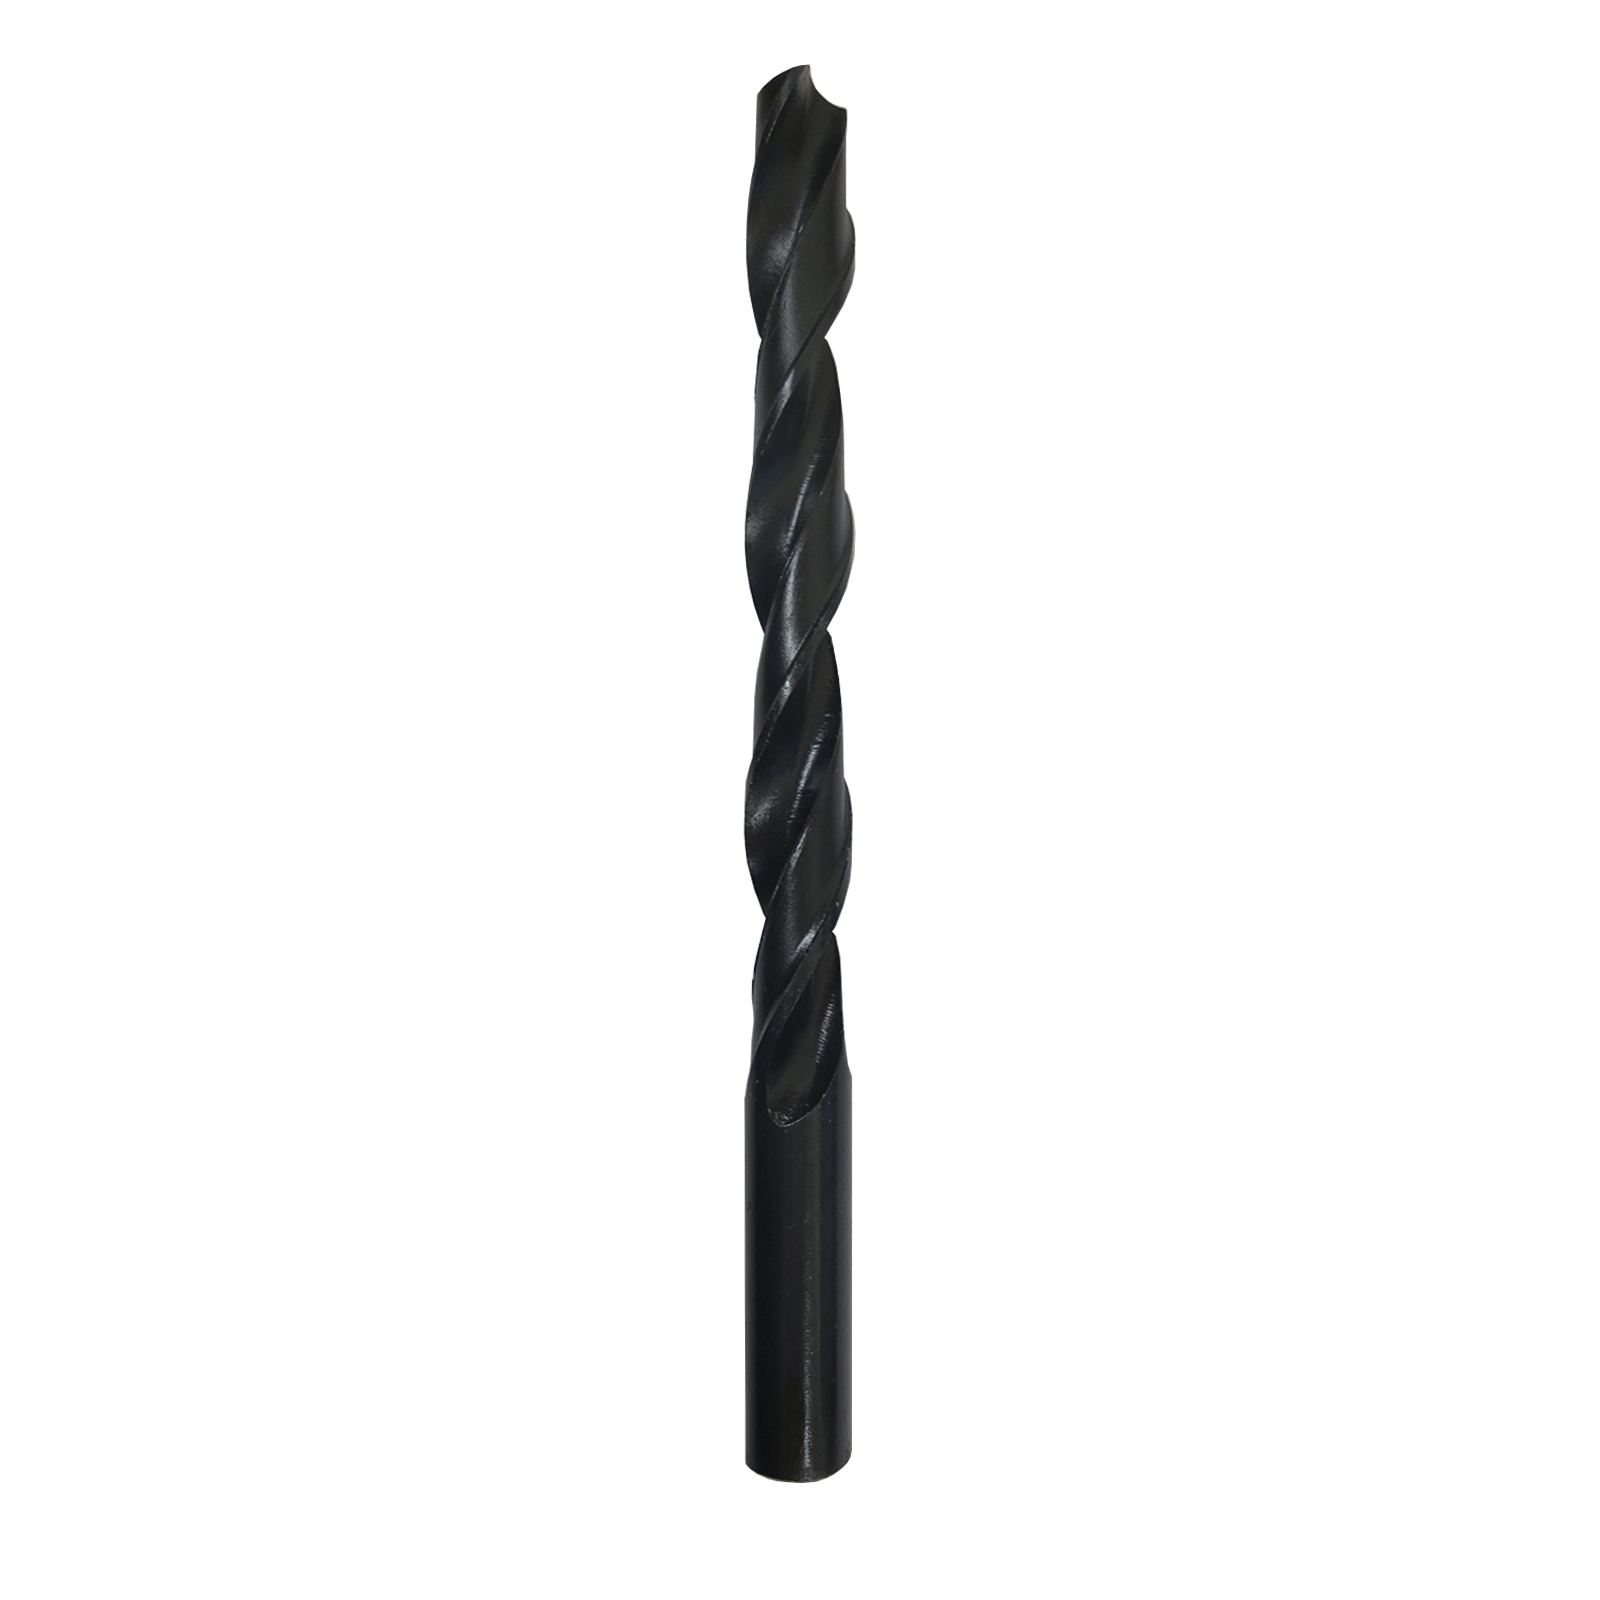 Gyros 45-42118 Premium (Made in US) Industrial Grade HSS Black Oxide Metric Drill Bit, 10 mm, Pack of 6